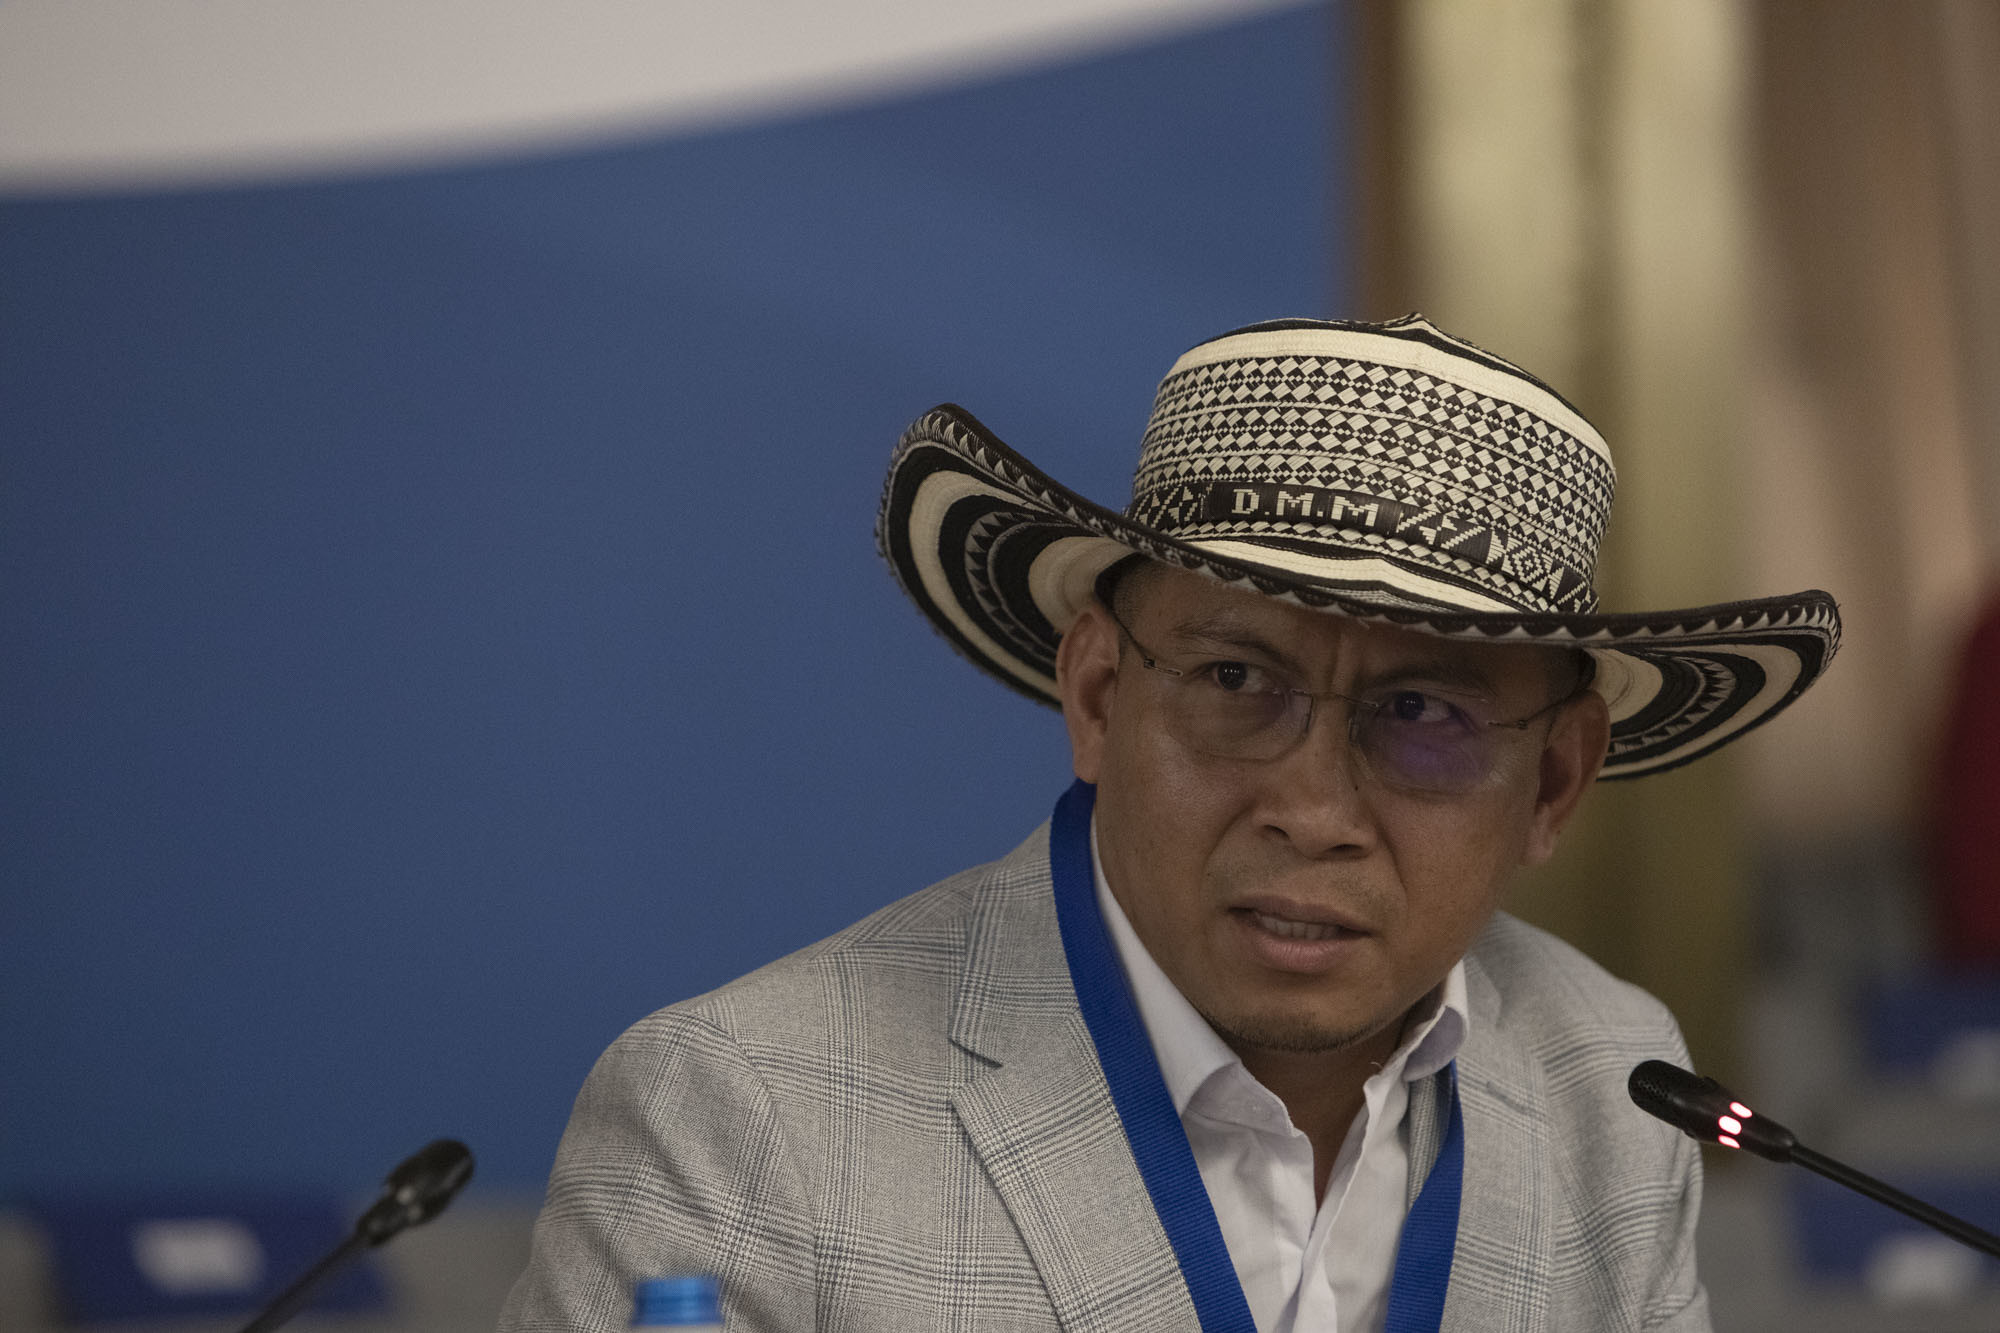 Darío Mejía Montalvo, chair of the UN Permanent Forum on Indigenous Issues, speaks at an event